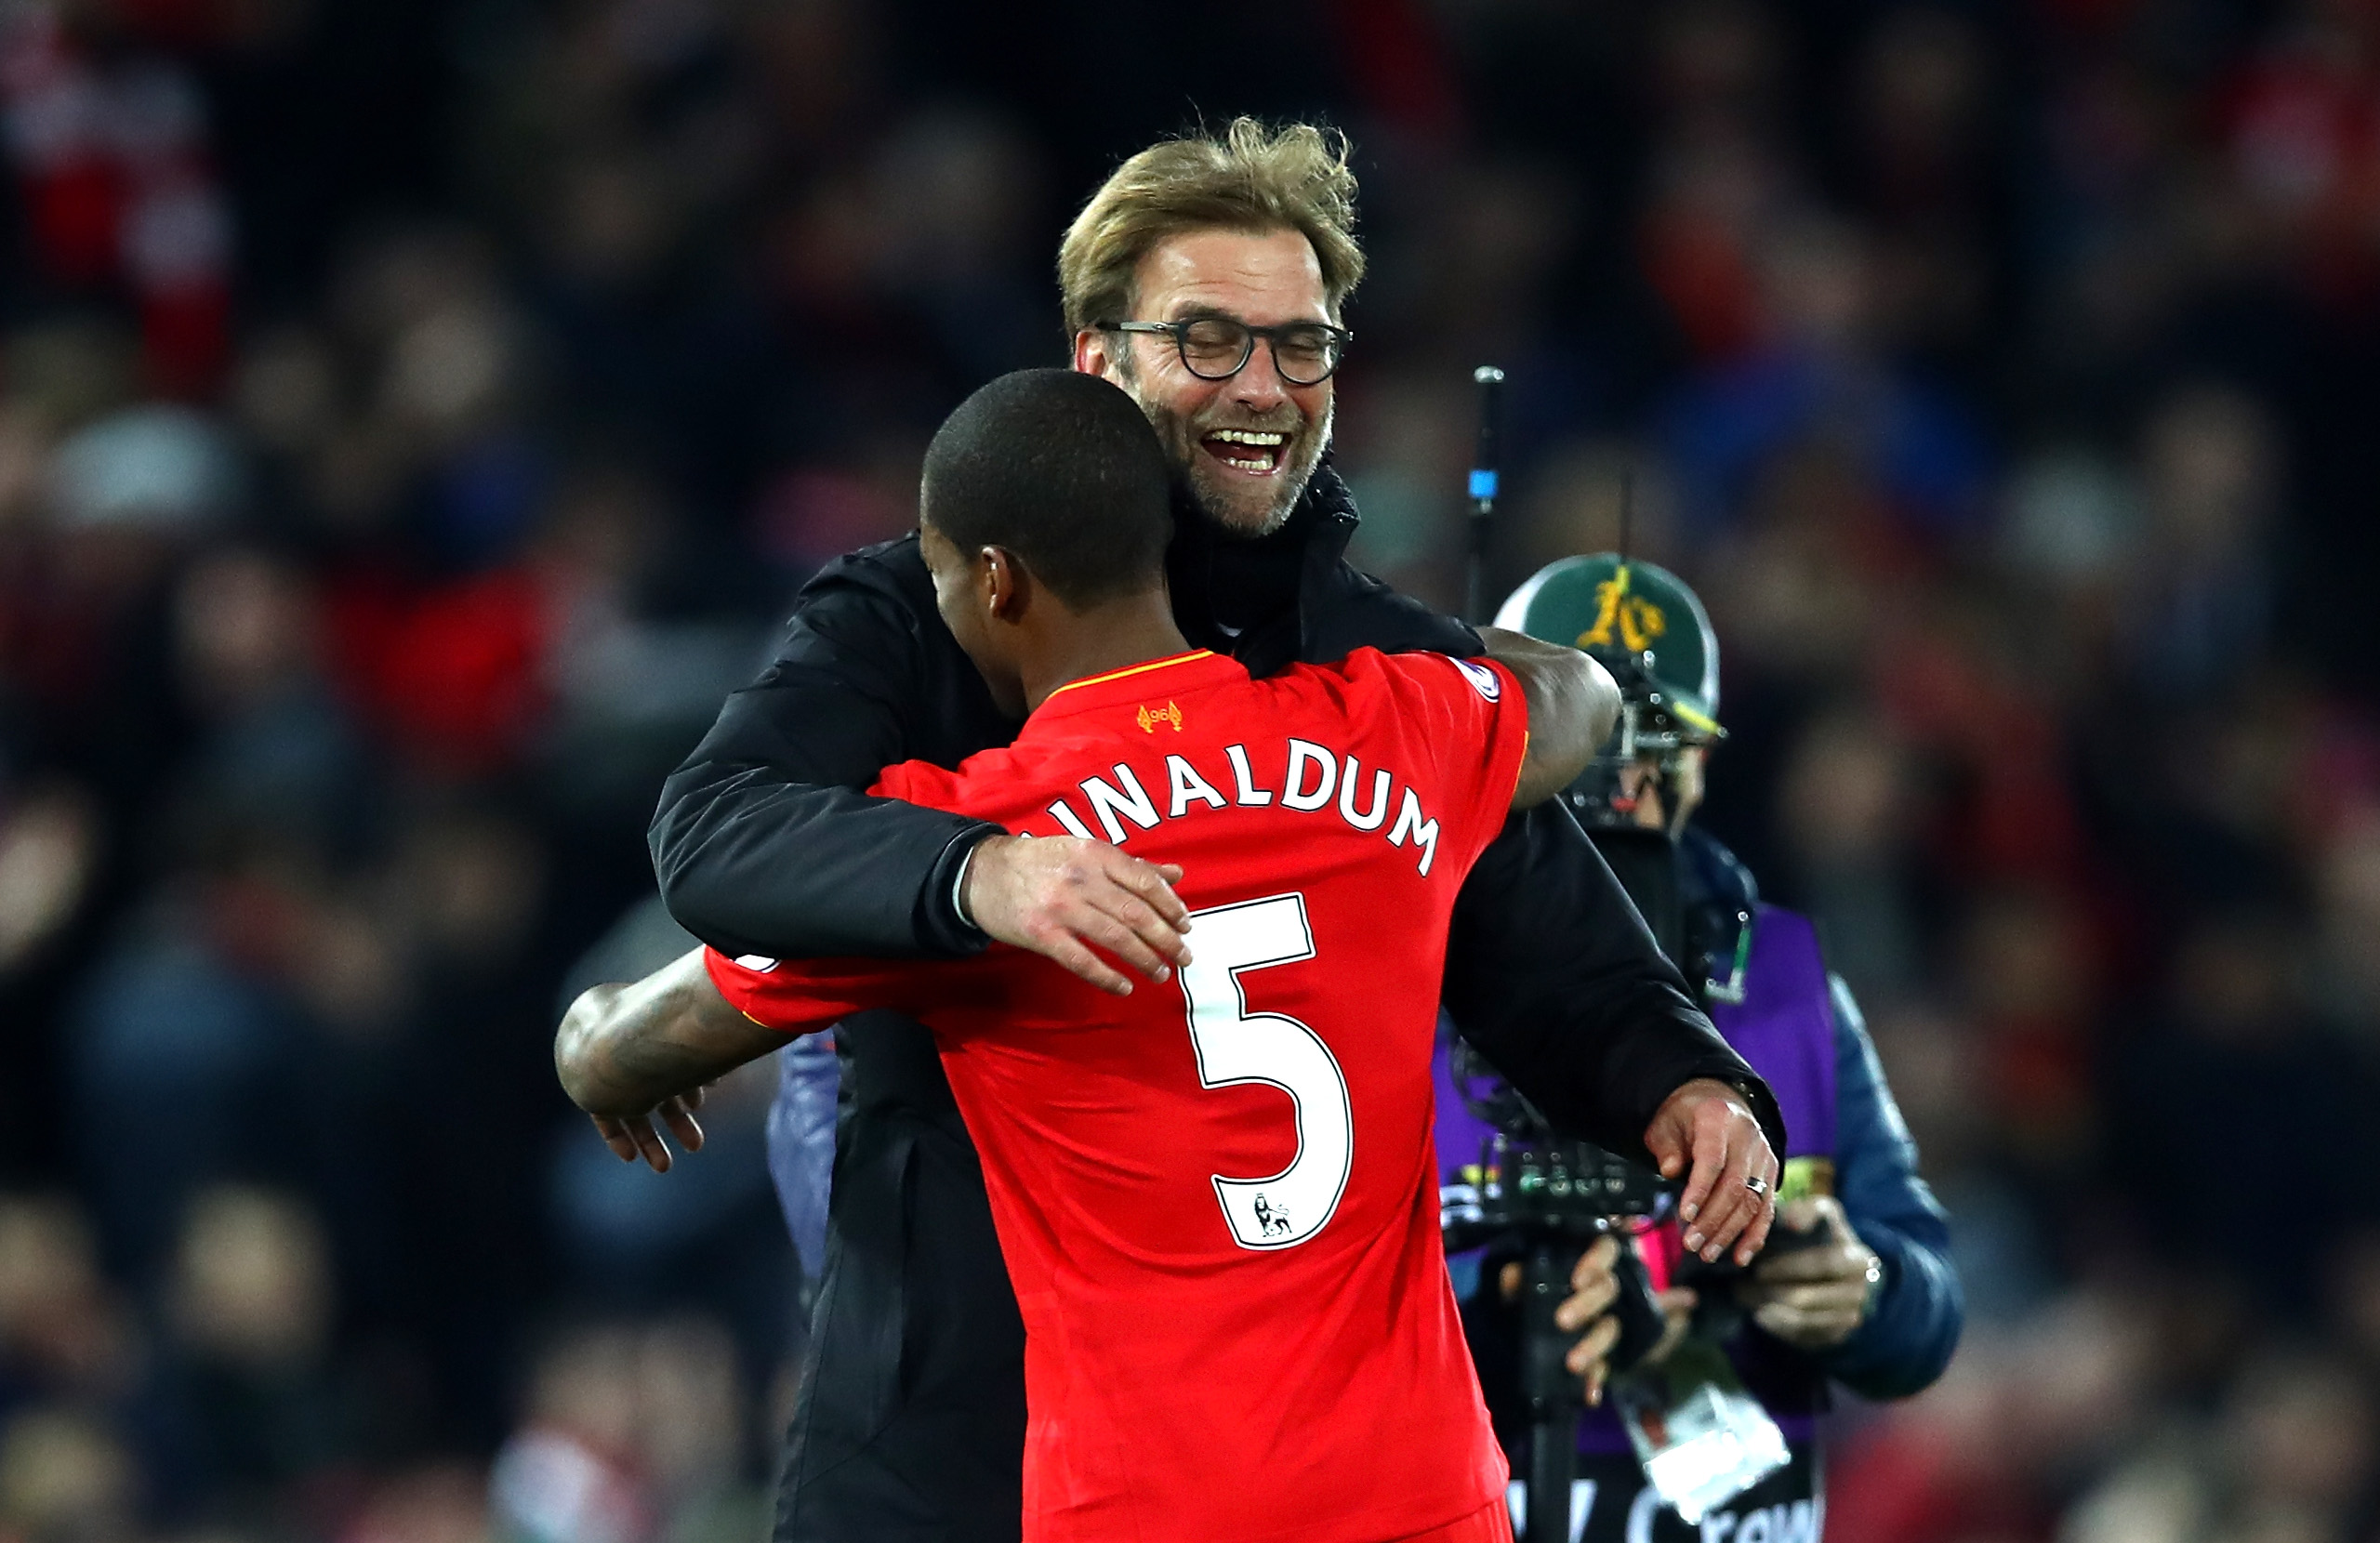 One of Klopp's most-trusted lieutenants, Wijnaldum could be on his way out (Photo by Clive Brunskill/Getty Images)